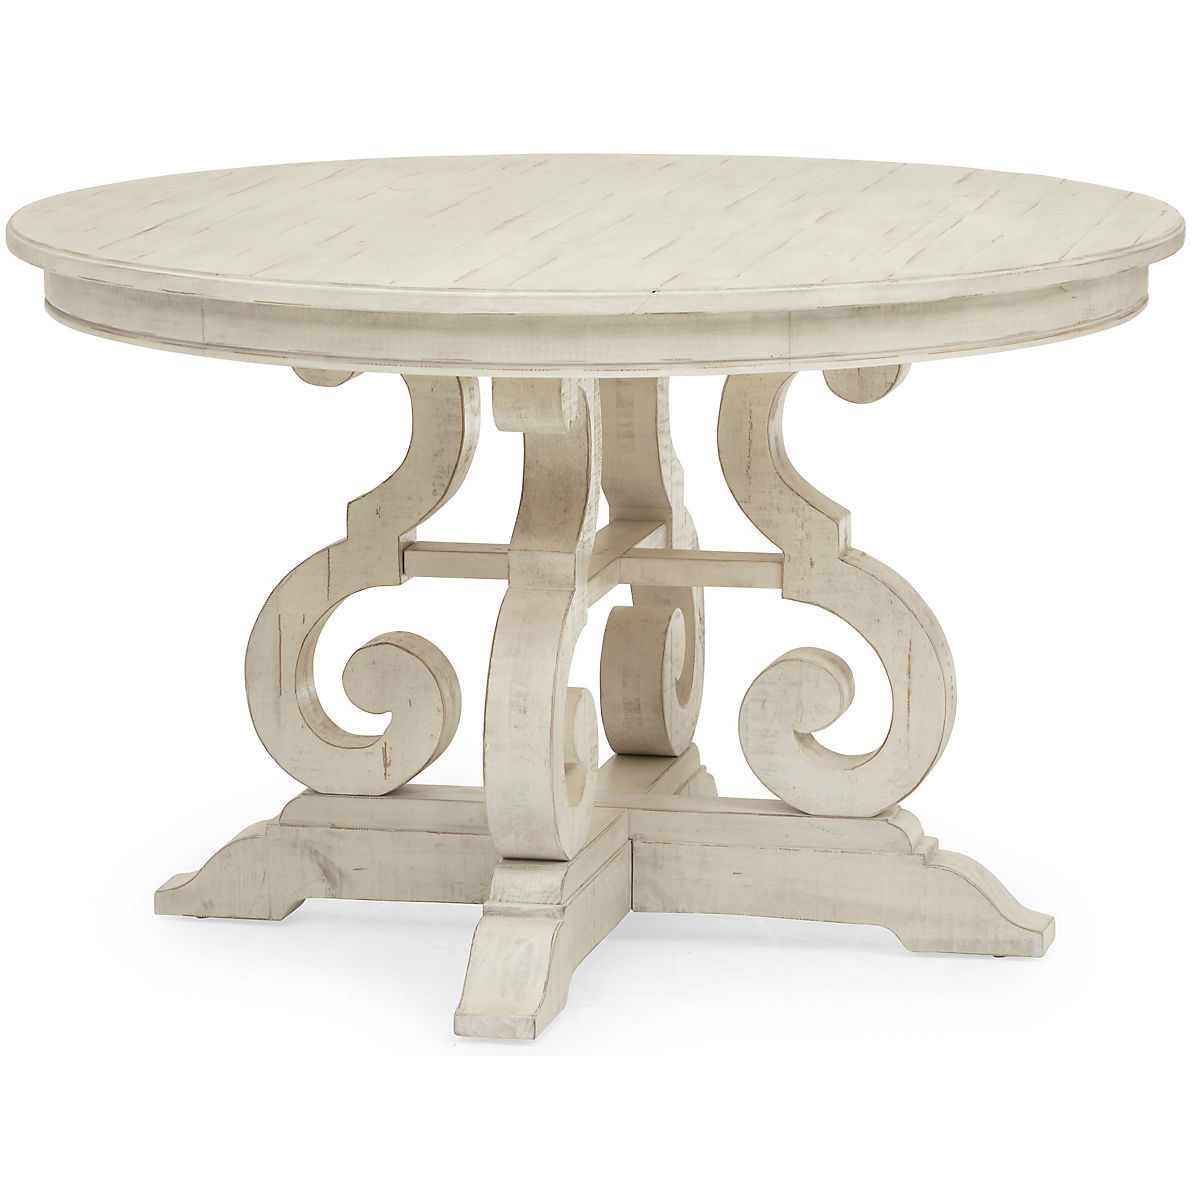 Treble 48 Inch Round Dining Table, Round Pedestal Table 48 Inch